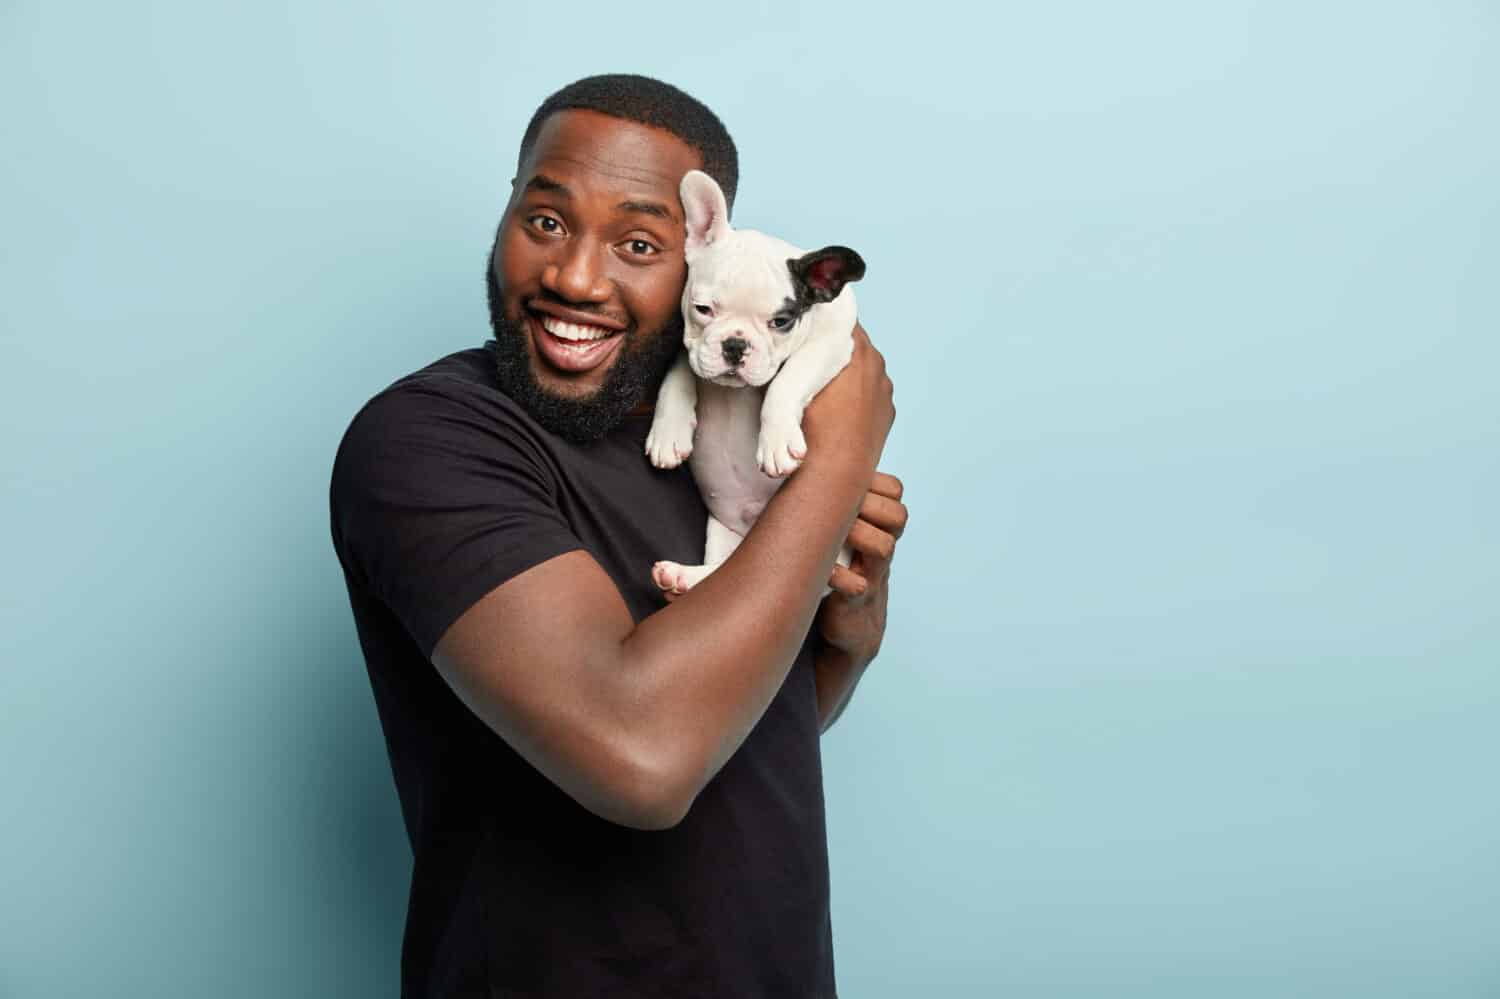 Happy satisfied smiling dark skinned man carries small pet of french bulldog breed, spend leisure time together, expresses positive emotions during photoshoot with dog, isolated over blue background